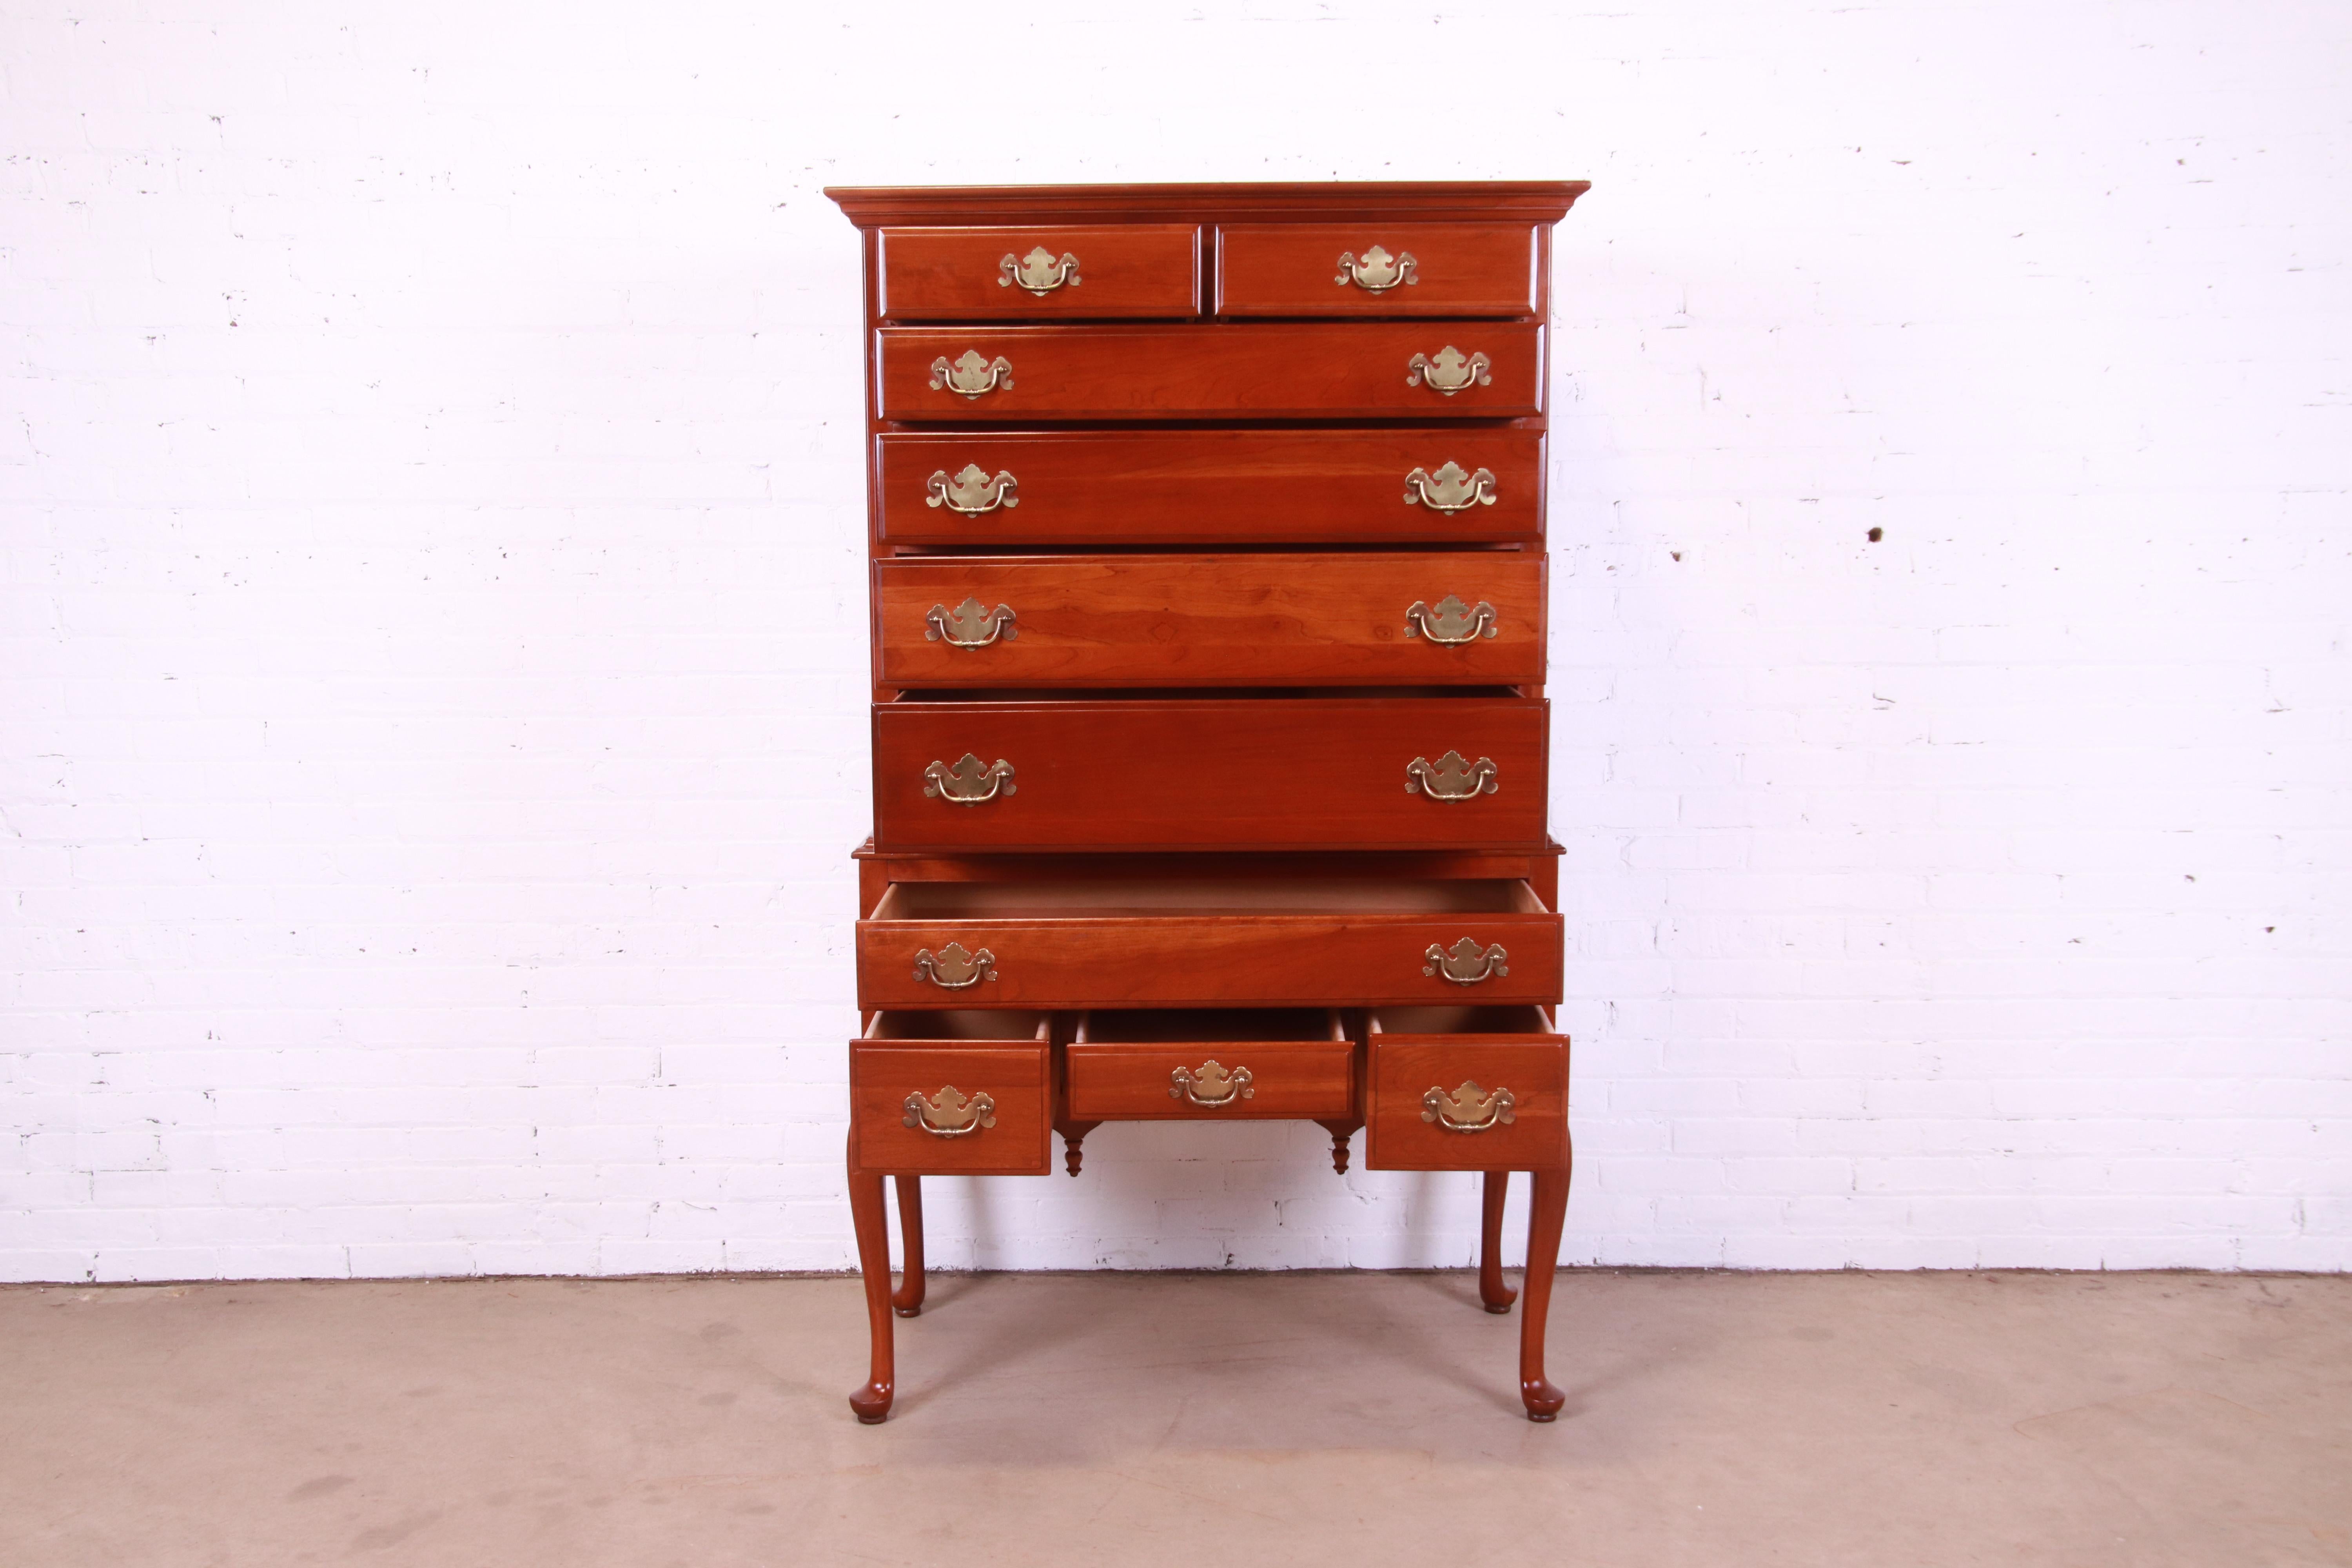 Queen Anne Solid Cherry Wood Highboy Dresser In Good Condition For Sale In South Bend, IN